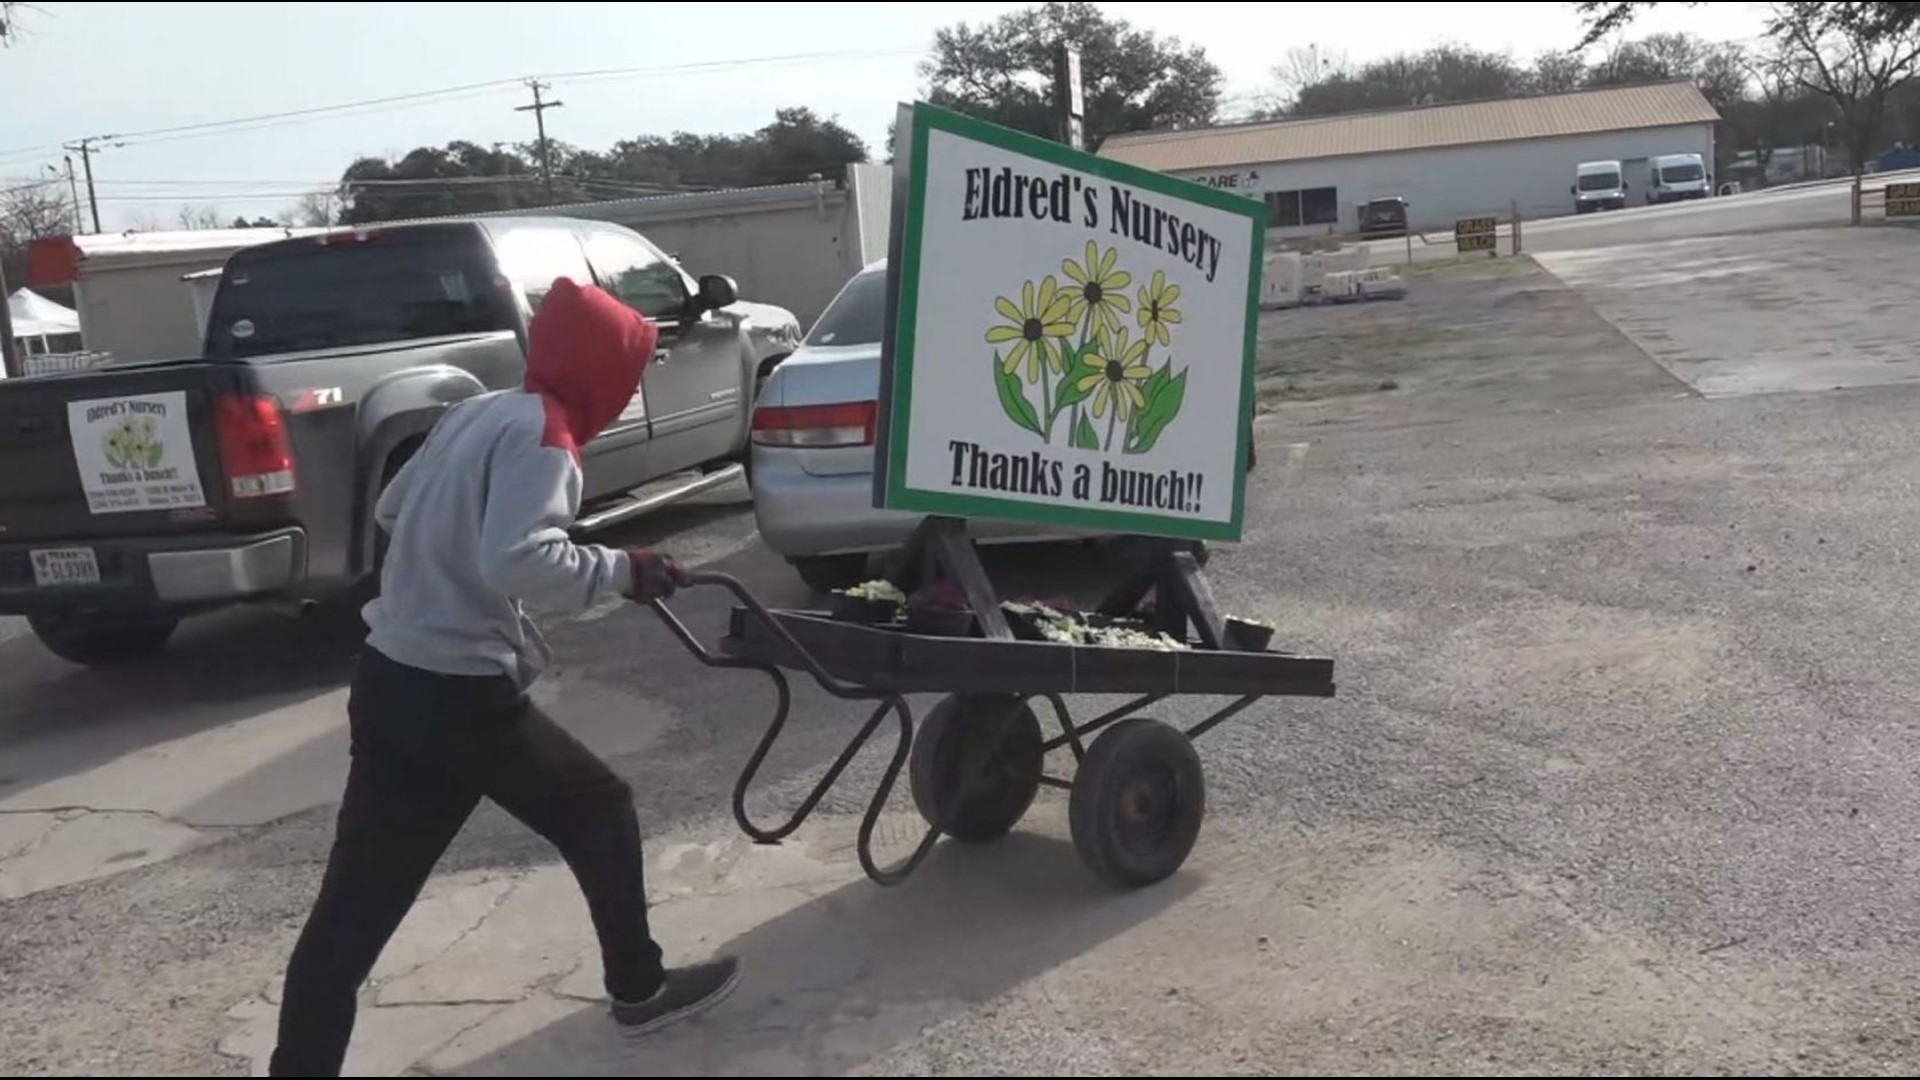 The transition from high school to the working world is a difficult one for people with special needs. Eldred's Nursery in Belton tackles that problem head on.